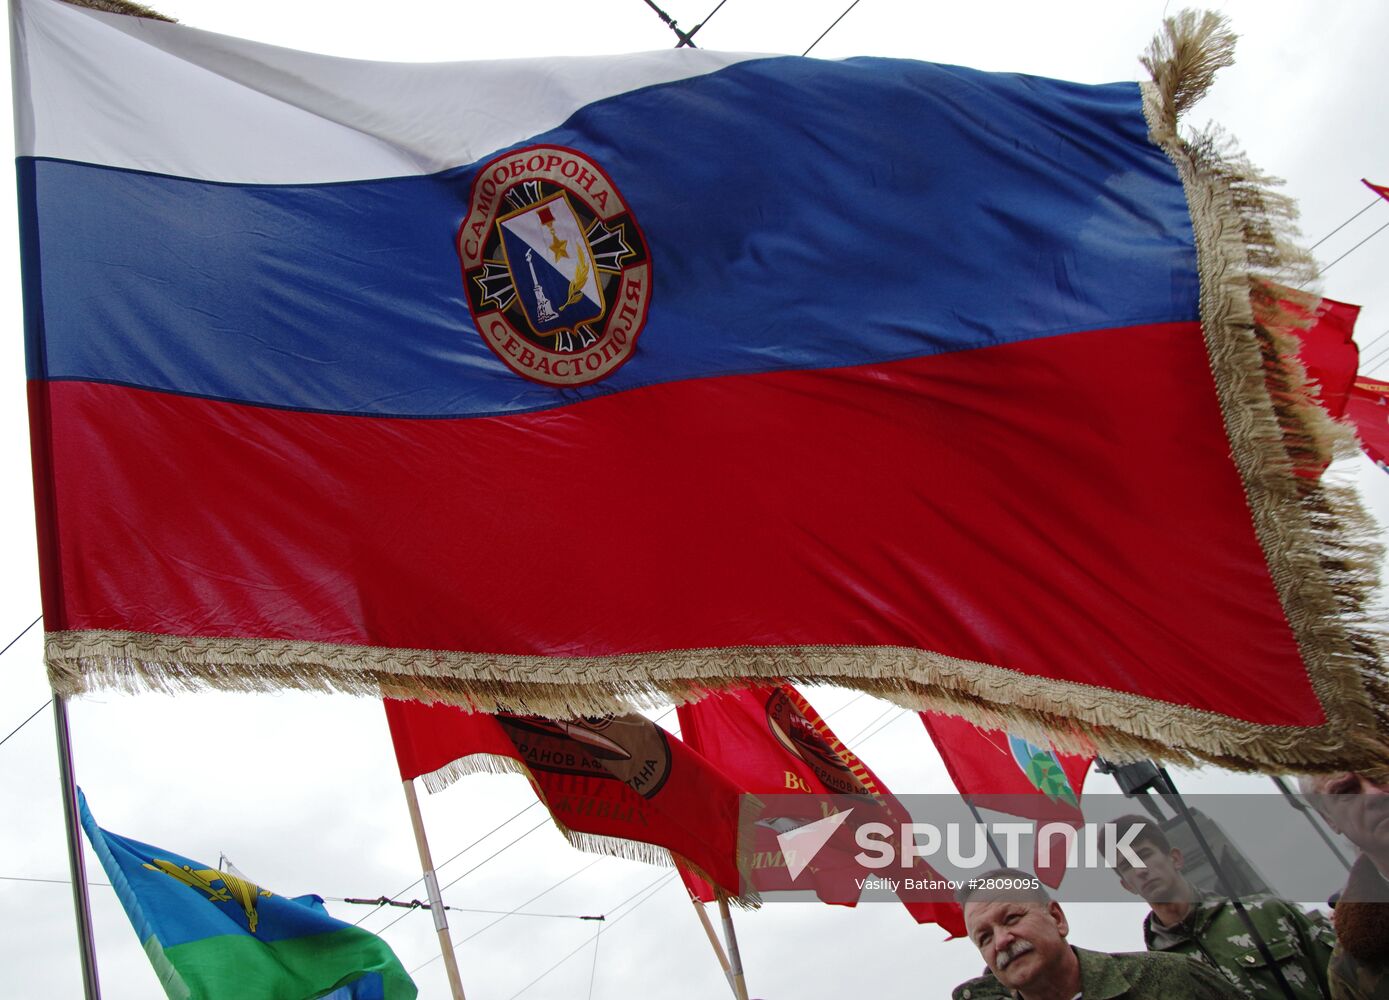 Celebration of the anniversary of Crimea reuniting with Russia